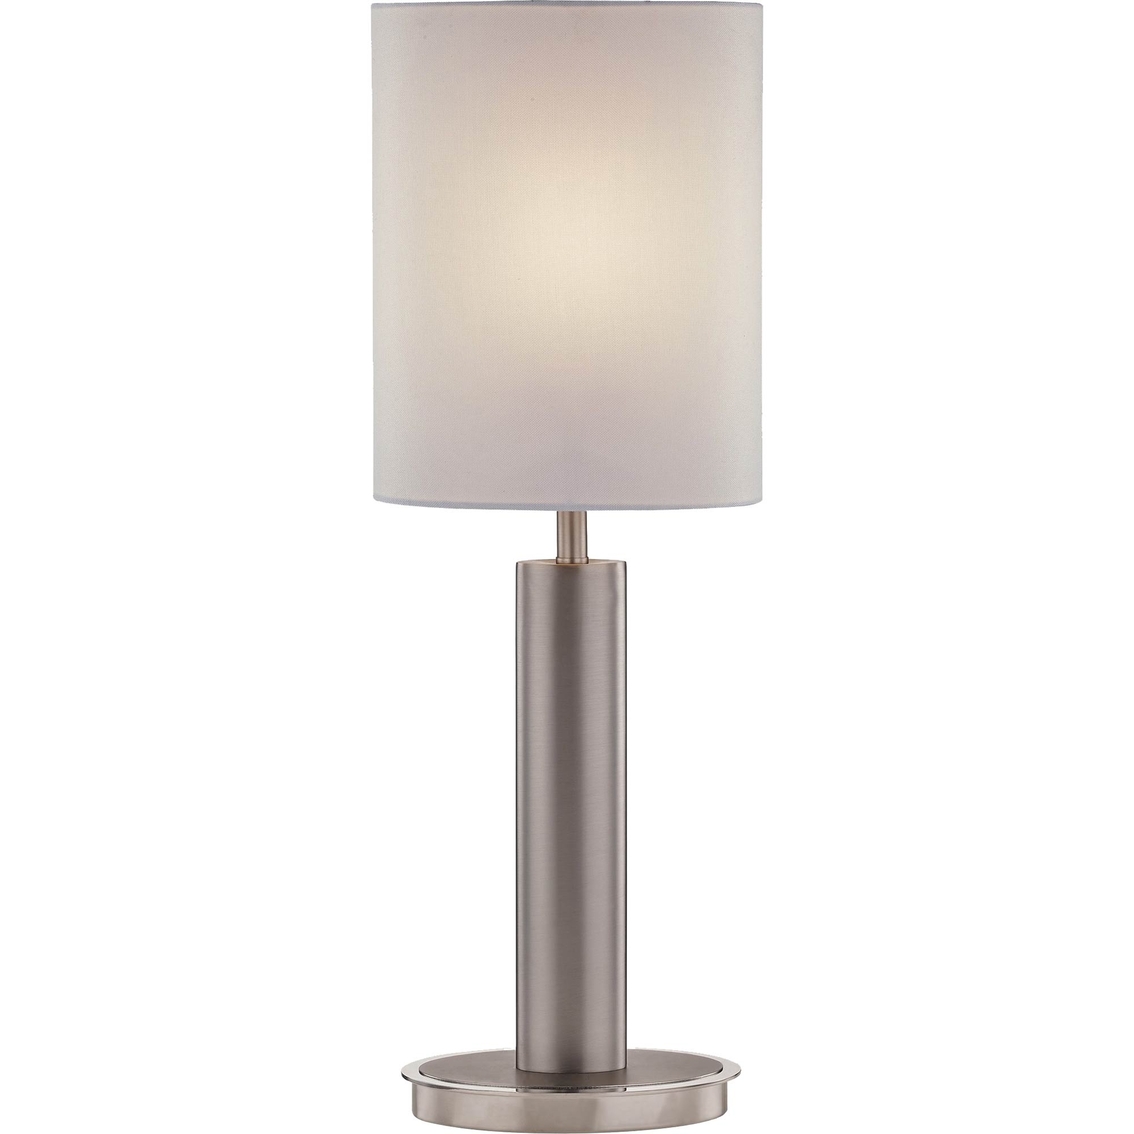 Artiva USA Catriona 27 in. Modern Slim Oval LED Touch Table Lamp